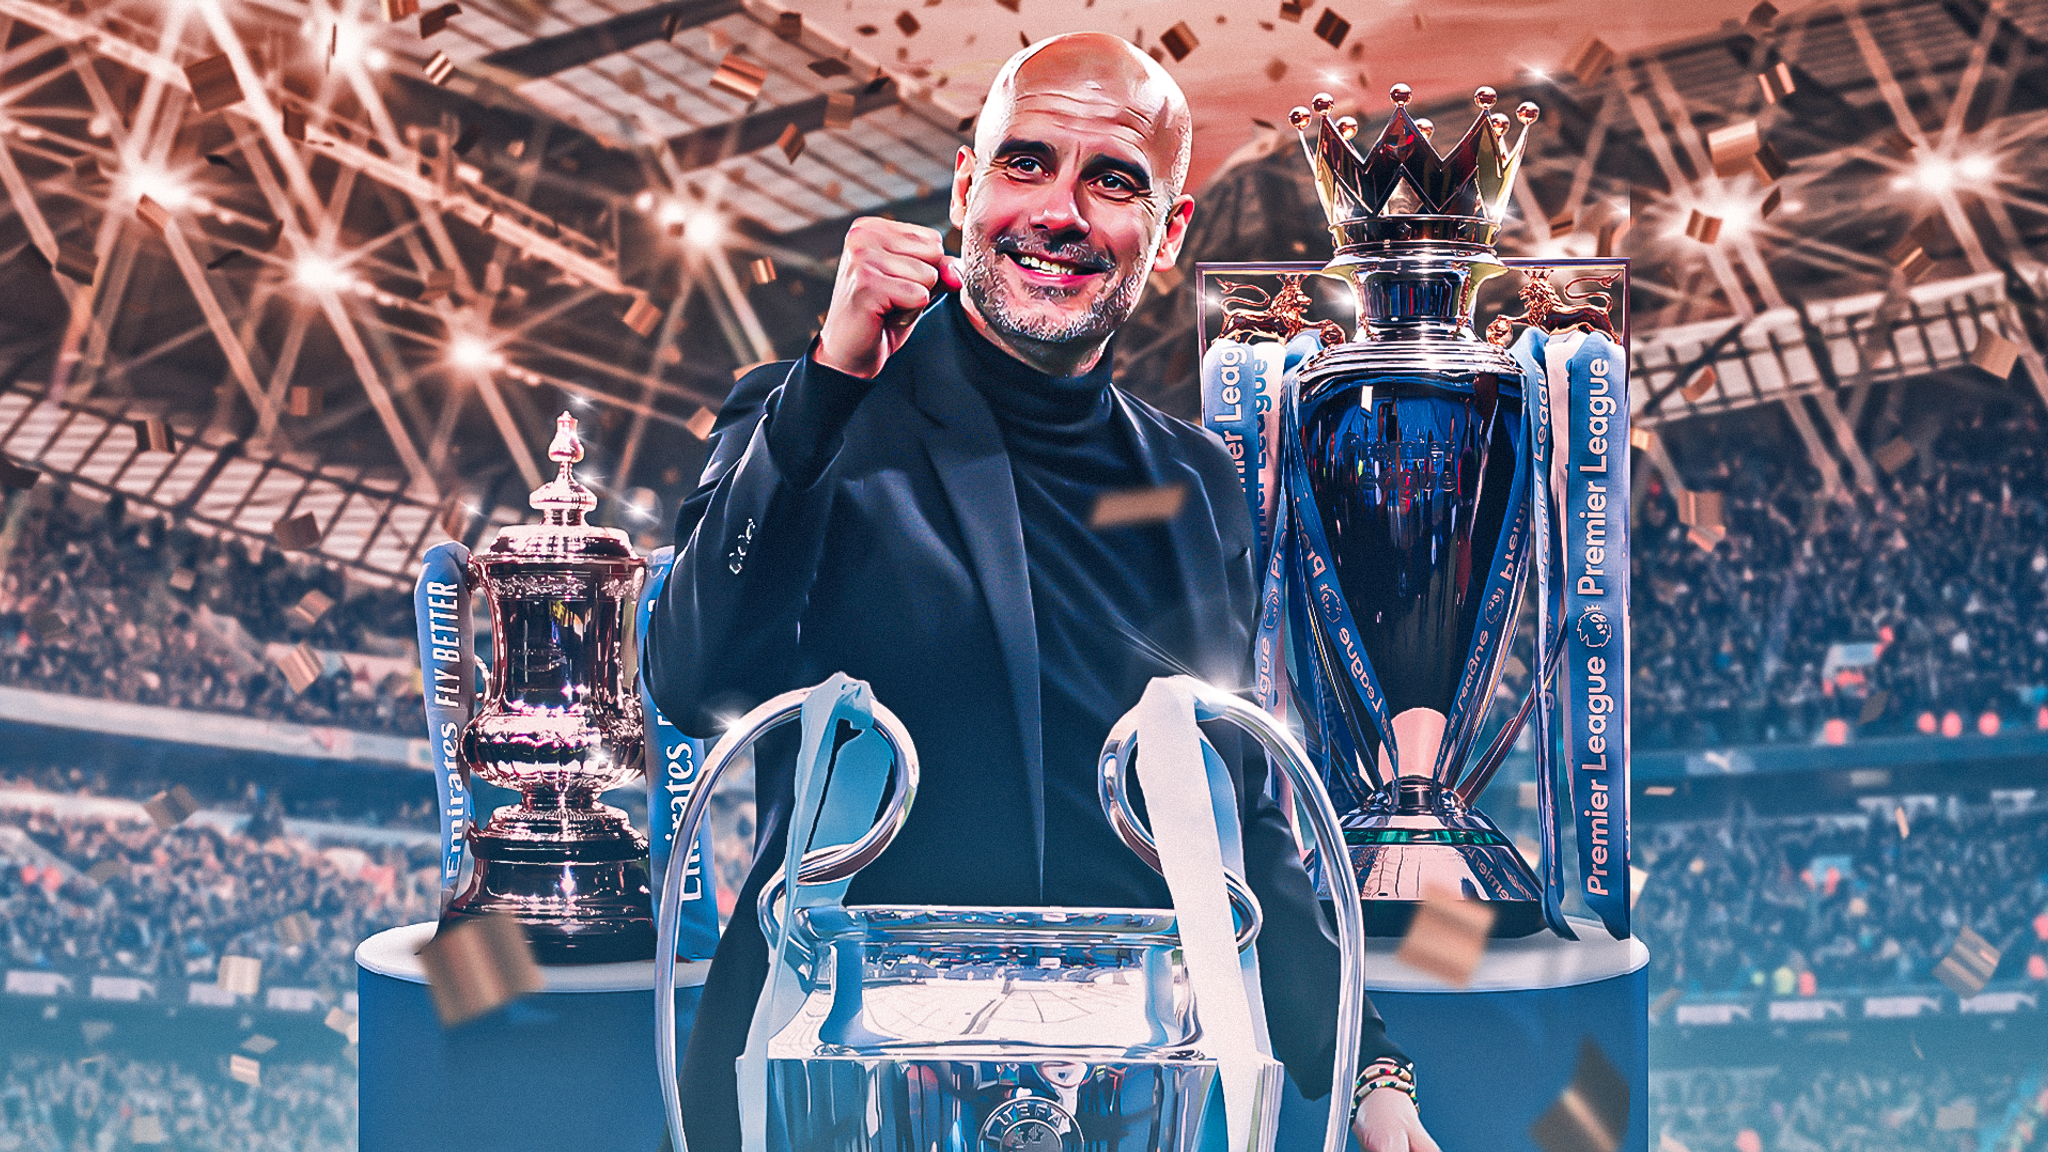 Manchester City poised to win Premier League title — Sport — The